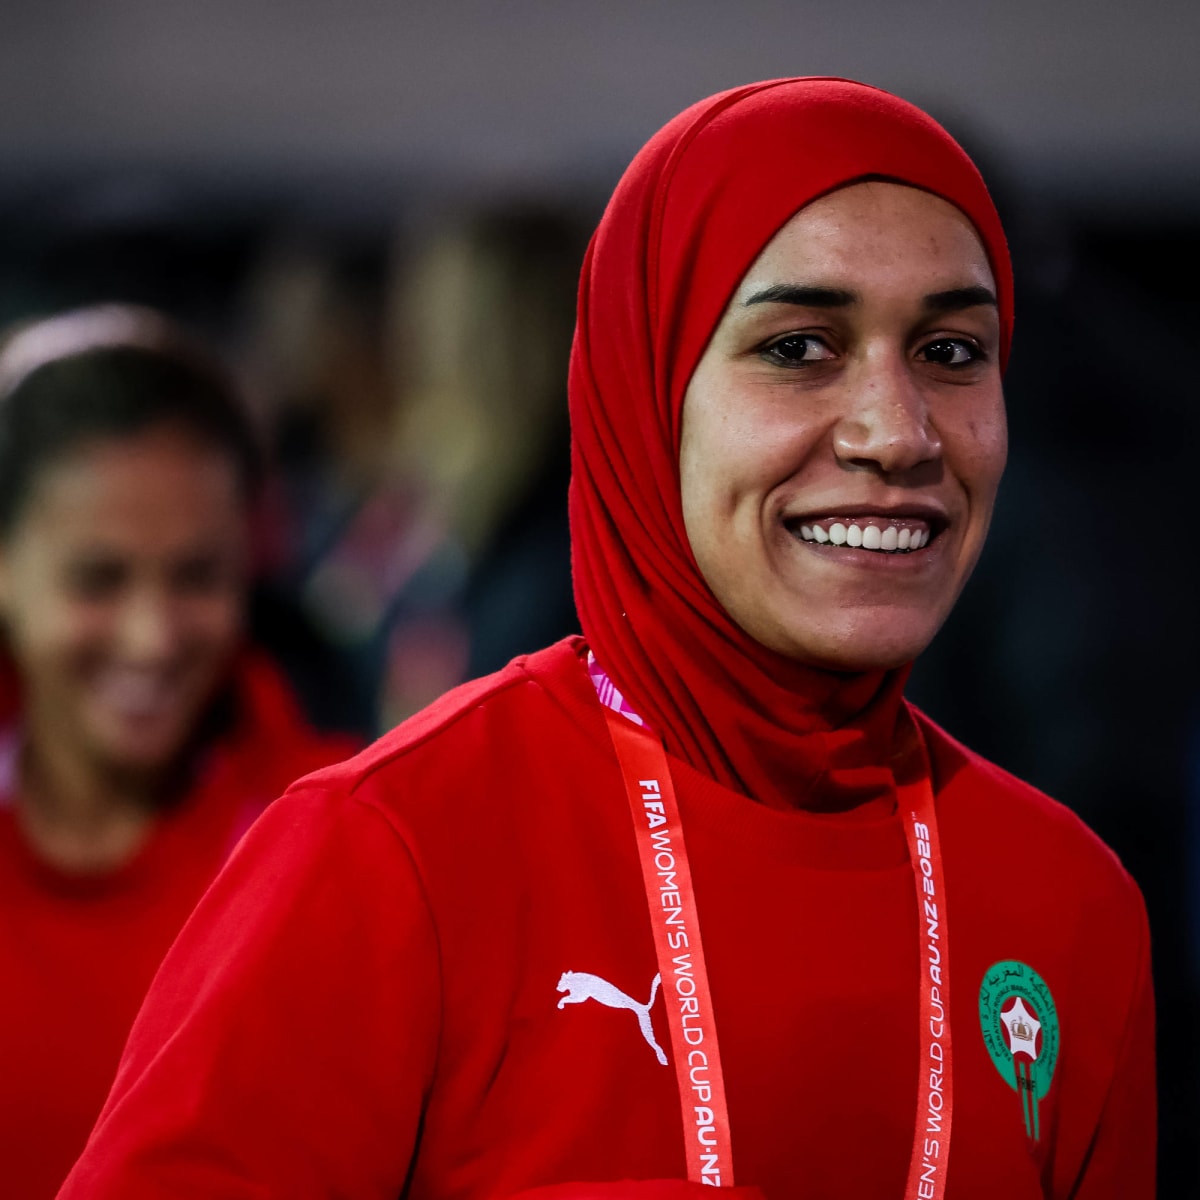 Moroccan Defender,  Benzina, Becomes The First Player To Wear Hijab At FIFA Women’s World Cup (PHOTOS)